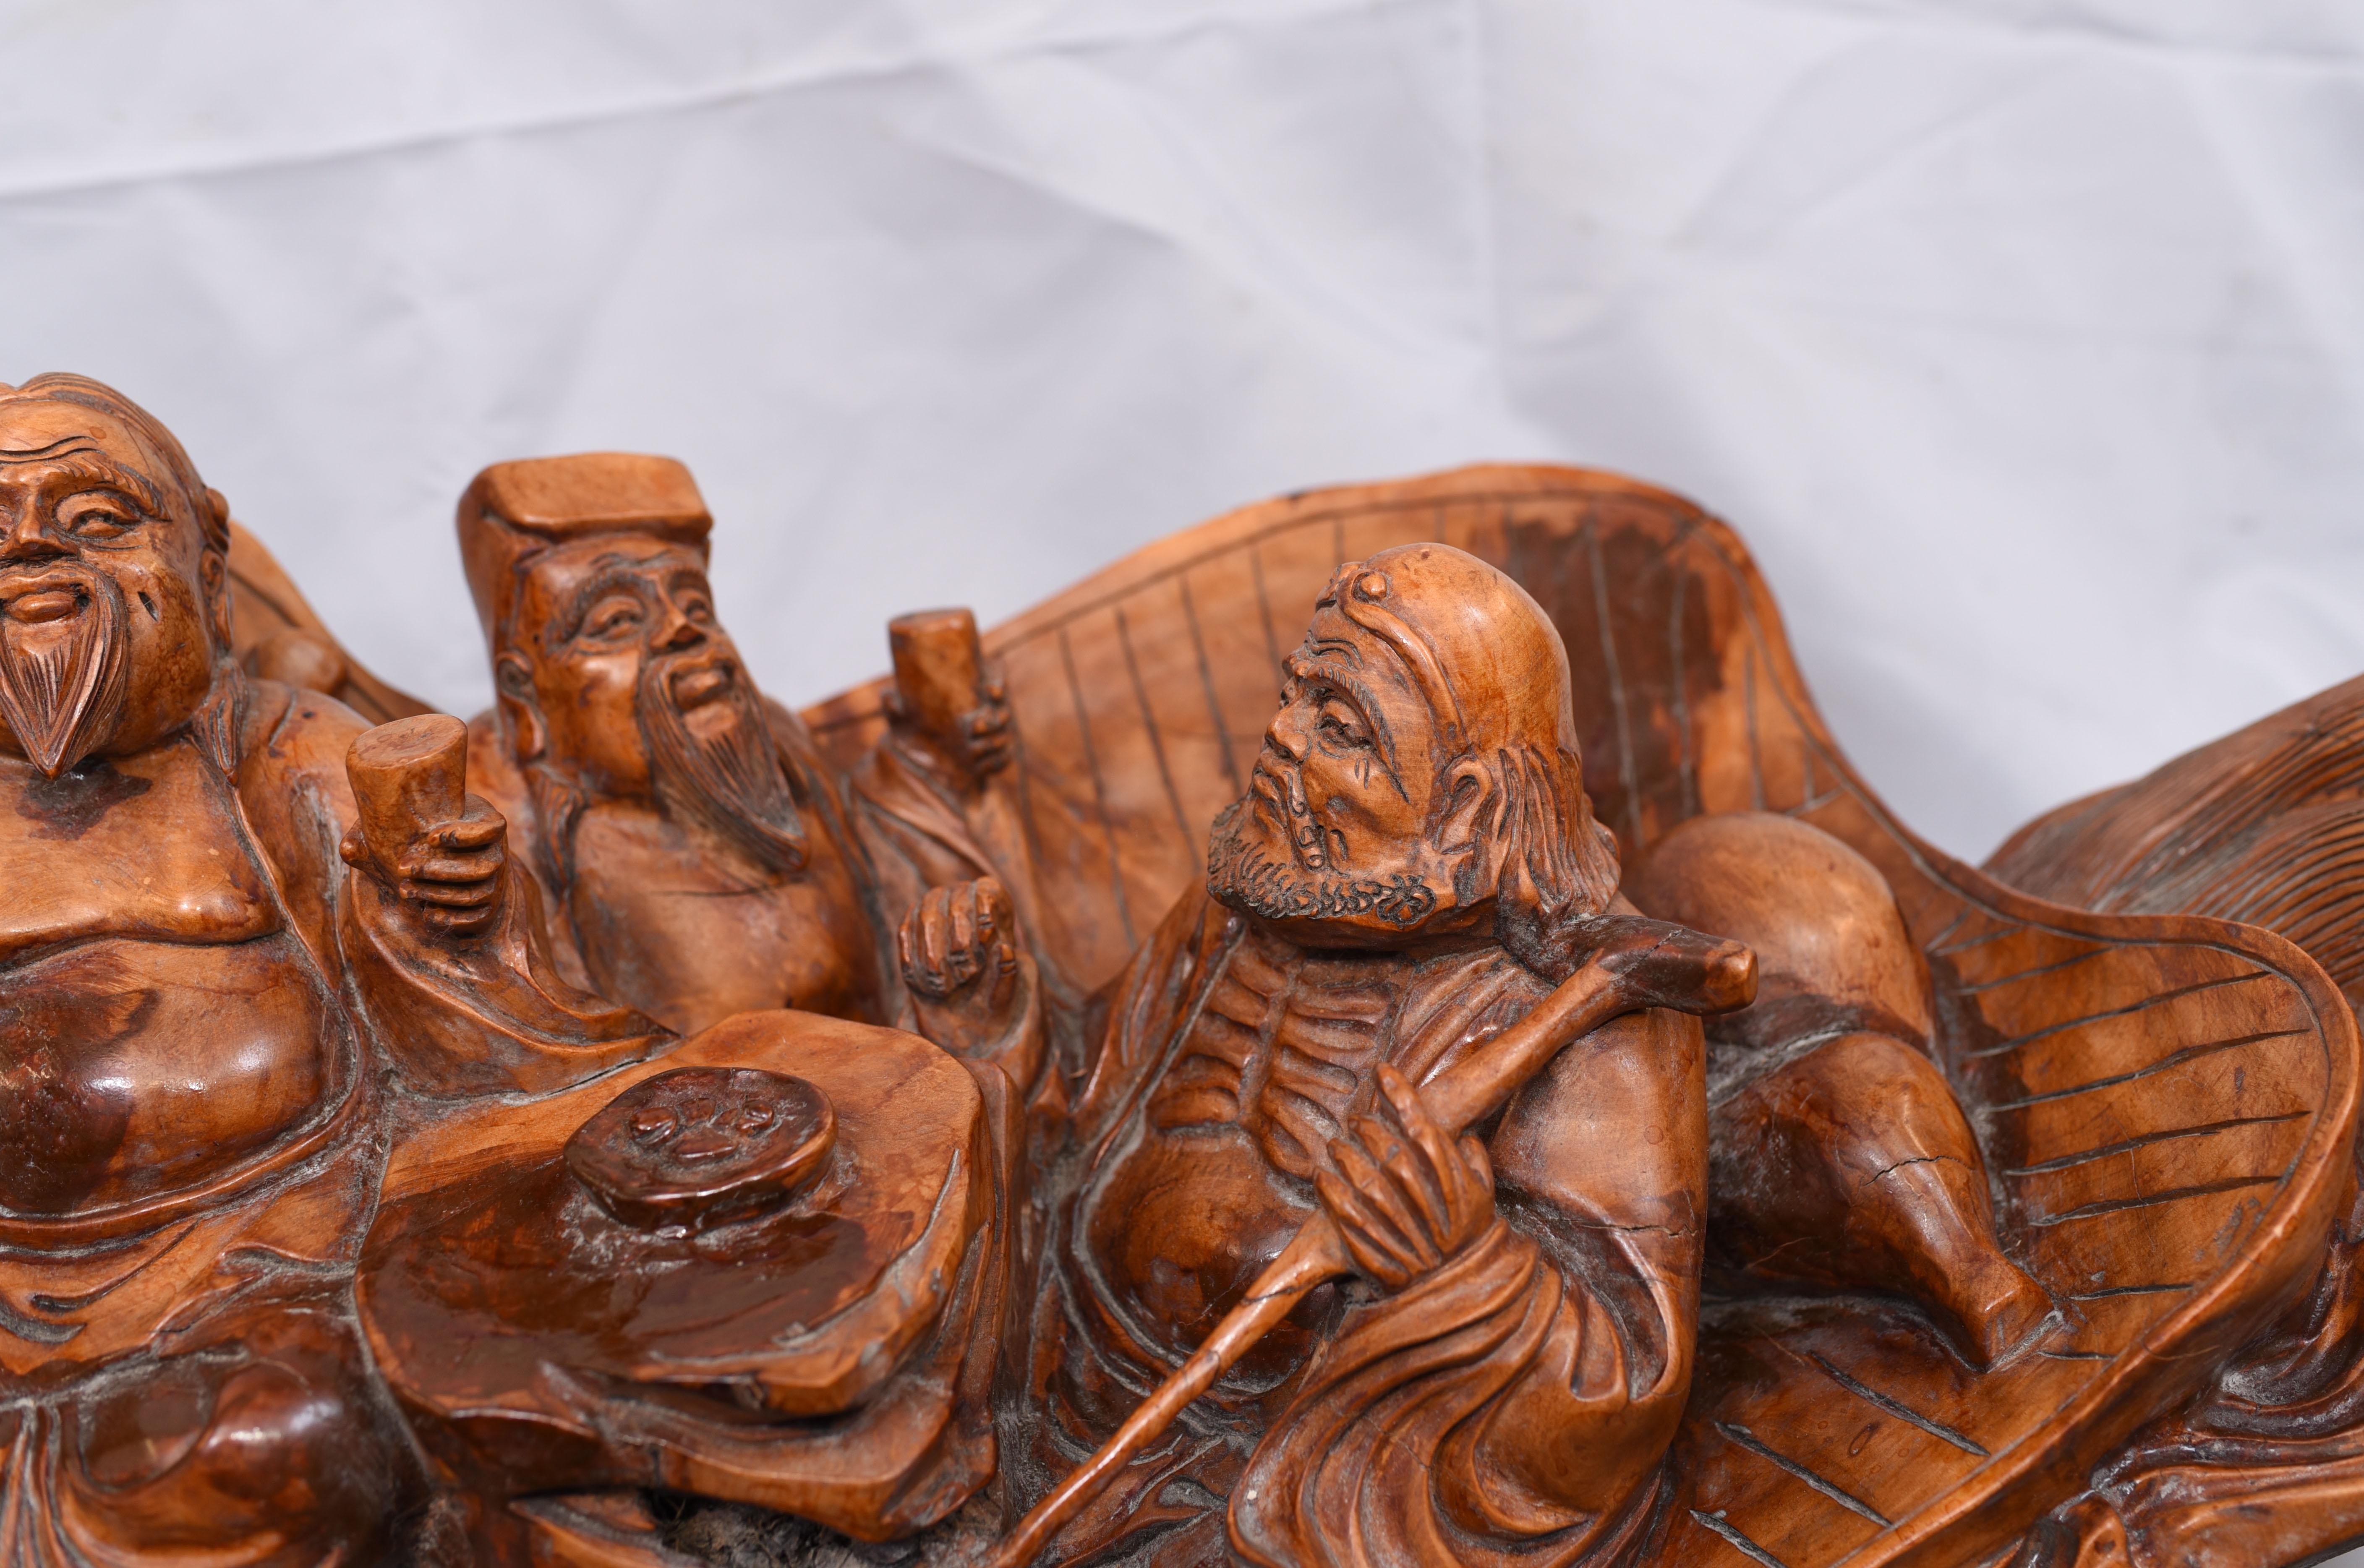 Early 20th Century Carved Chinese Wise Men Statue Circa 1900, Hardwood Boat Figurine